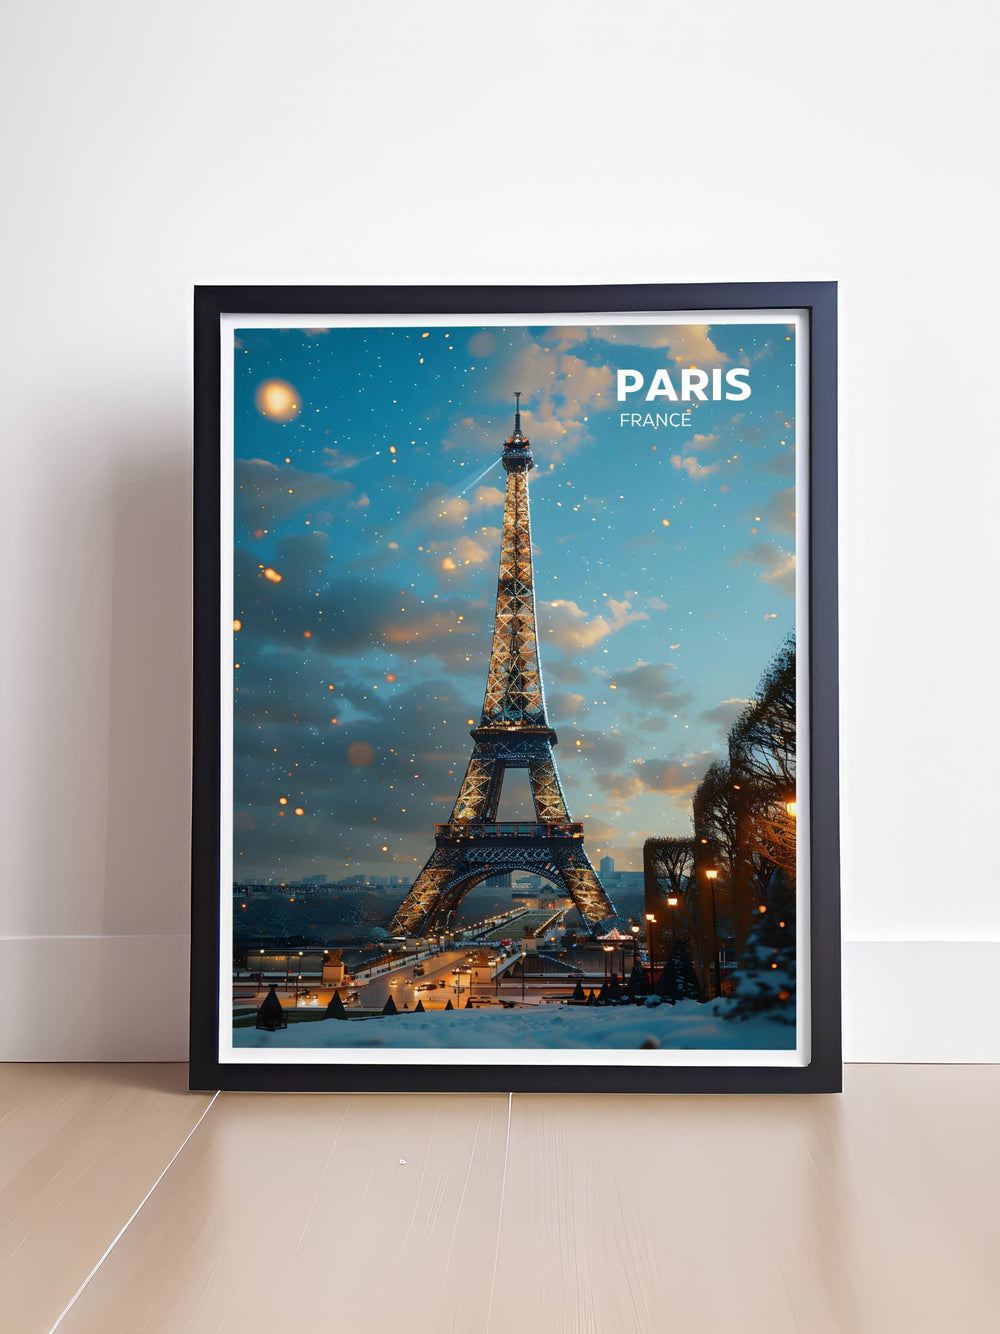 Adorn your walls with the charm of Parisian streets and the elegance of the Eiffel Tower with our Paris Wall Art collection.